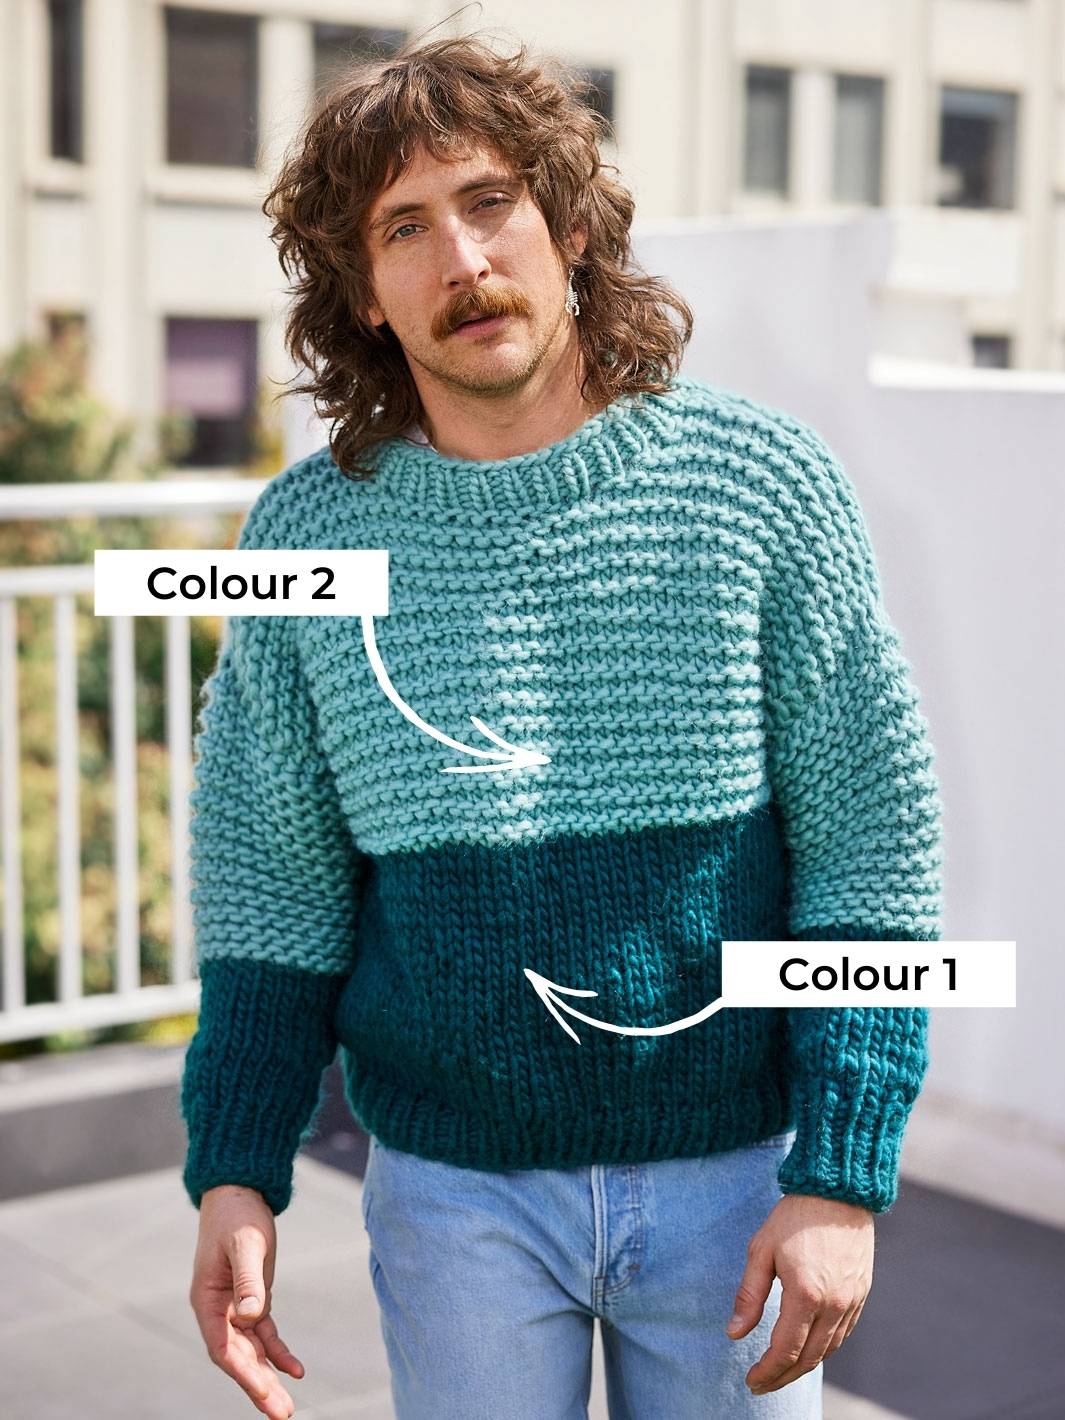 Man wears chunky knitted jumper